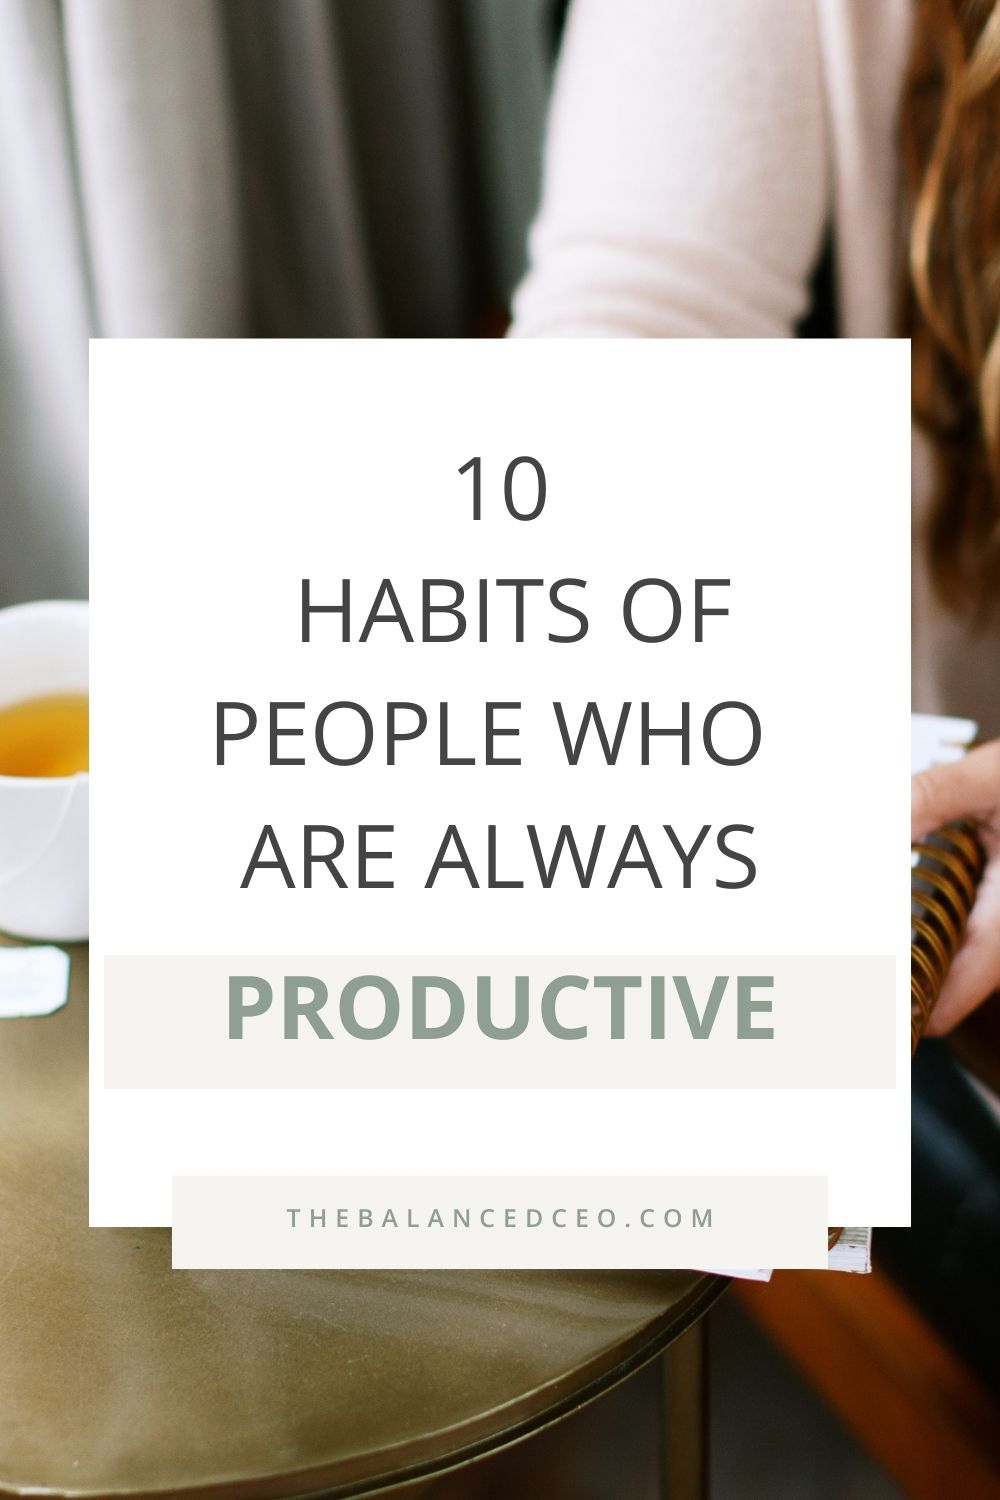 10 Habits of People Who Are Always Productive